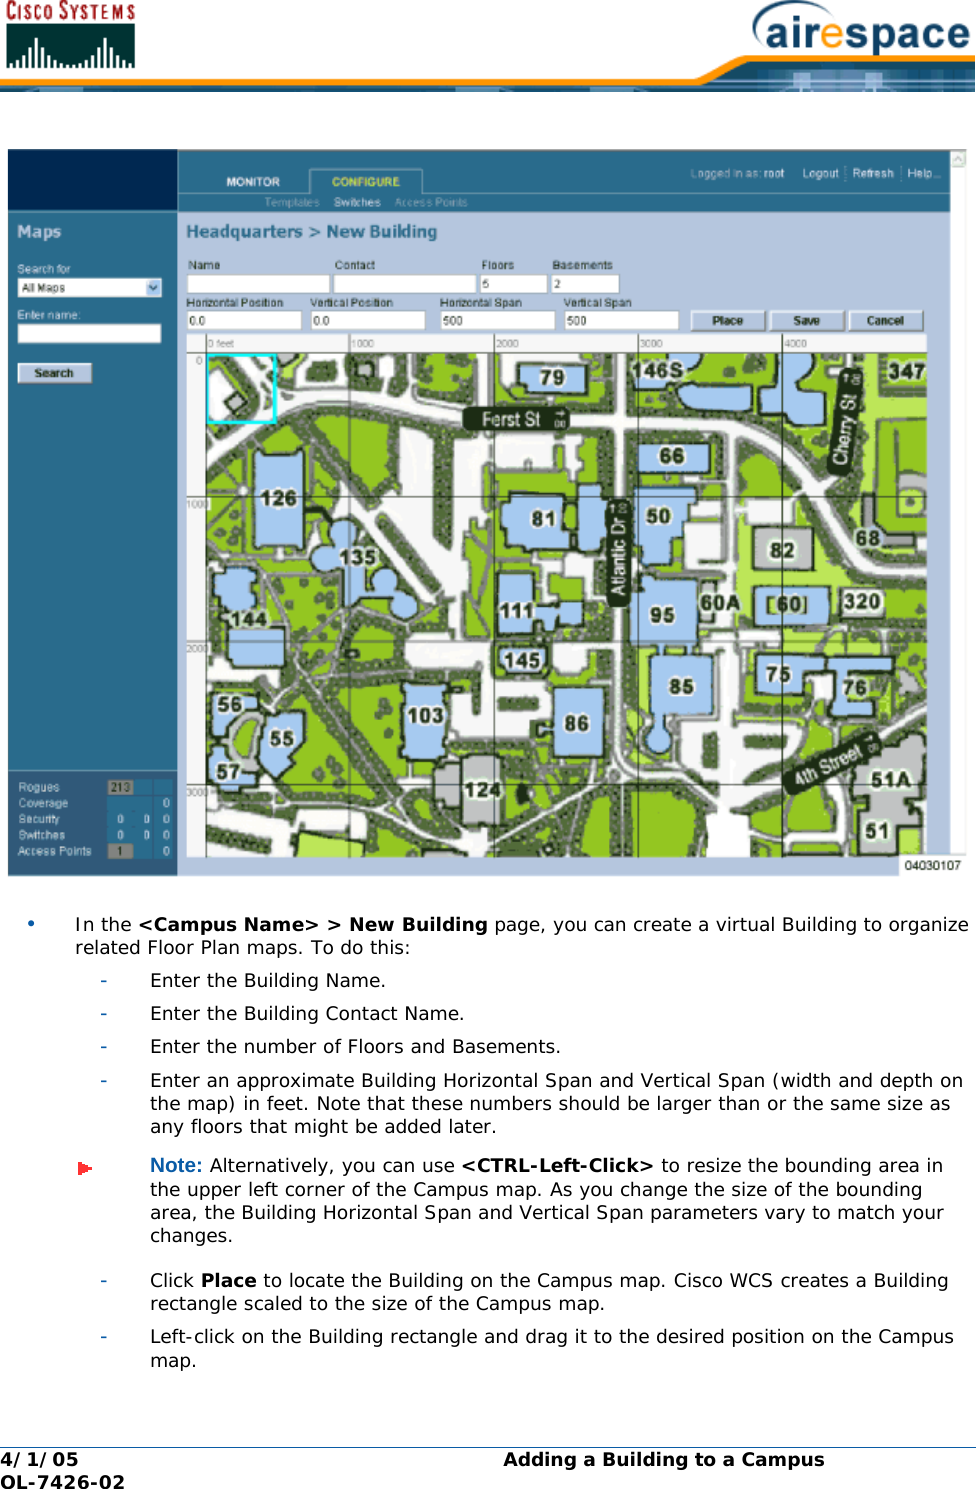 4/1/05 Adding a Building to a Campus  OL-7426-02•In the &lt;Campus Name&gt; &gt; New Building page, you can create a virtual Building to organize related Floor Plan maps. To do this:-Enter the Building Name.-Enter the Building Contact Name.-Enter the number of Floors and Basements.-Enter an approximate Building Horizontal Span and Vertical Span (width and depth on the map) in feet. Note that these numbers should be larger than or the same size as any floors that might be added later.-Click Place to locate the Building on the Campus map. Cisco WCS creates a Building rectangle scaled to the size of the Campus map.-Left-click on the Building rectangle and drag it to the desired position on the Campus map.Note: Alternatively, you can use &lt;CTRL-Left-Click&gt; to resize the bounding area in the upper left corner of the Campus map. As you change the size of the bounding area, the Building Horizontal Span and Vertical Span parameters vary to match your changes.